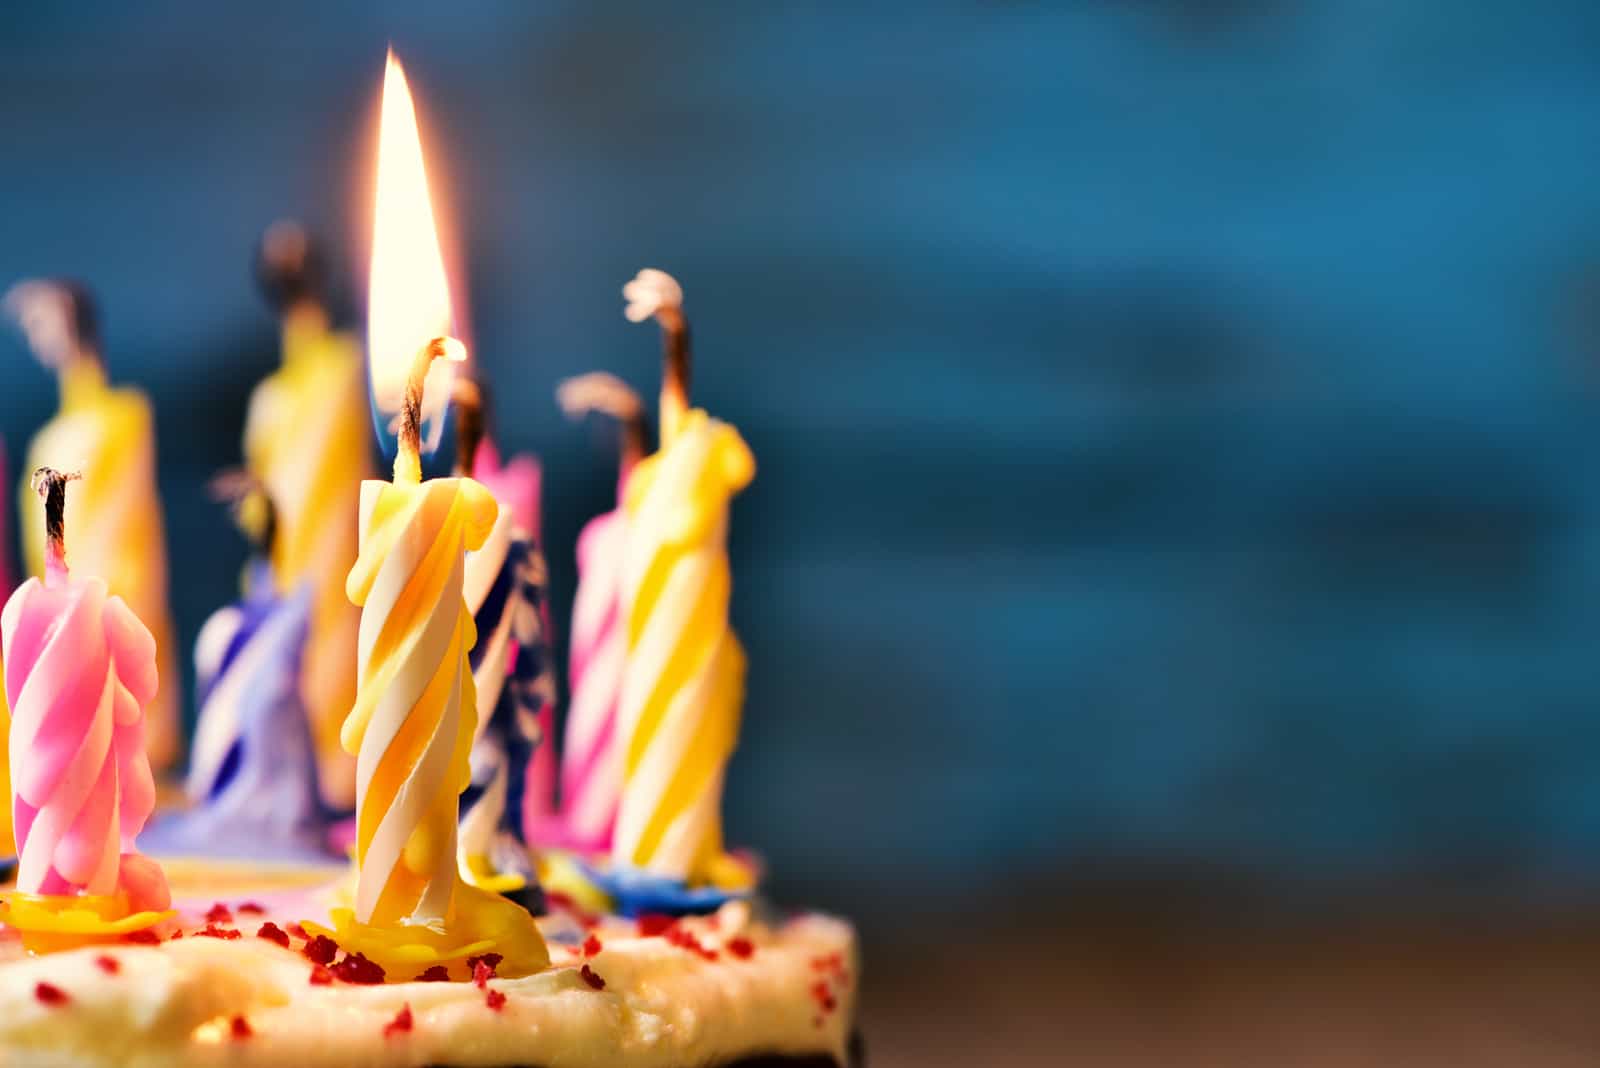 70th Birthday Gifts That Are Meaningful & Memorable » All Gifts Considered